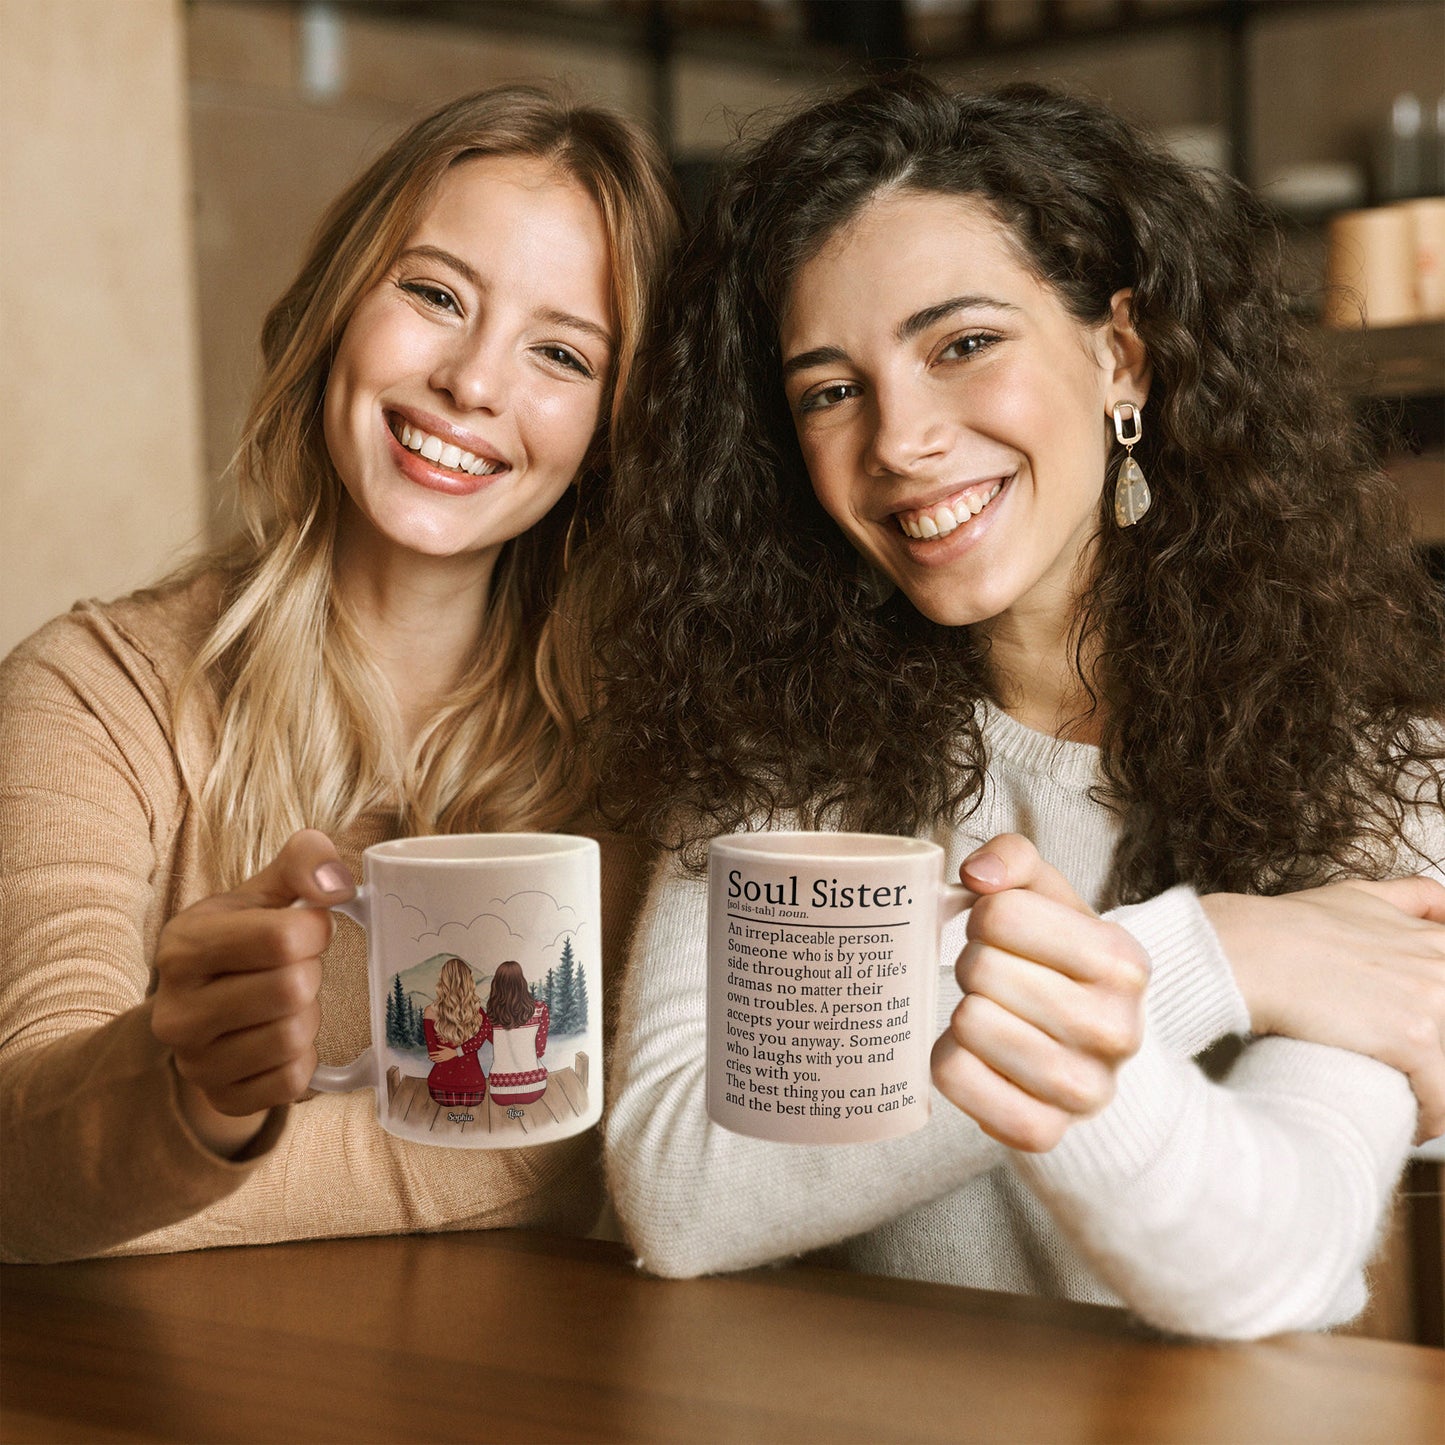 Soul Sister An Irreplacable Person - Personalized Mug - Christmas Gift For Friends, Best Friends, Besties